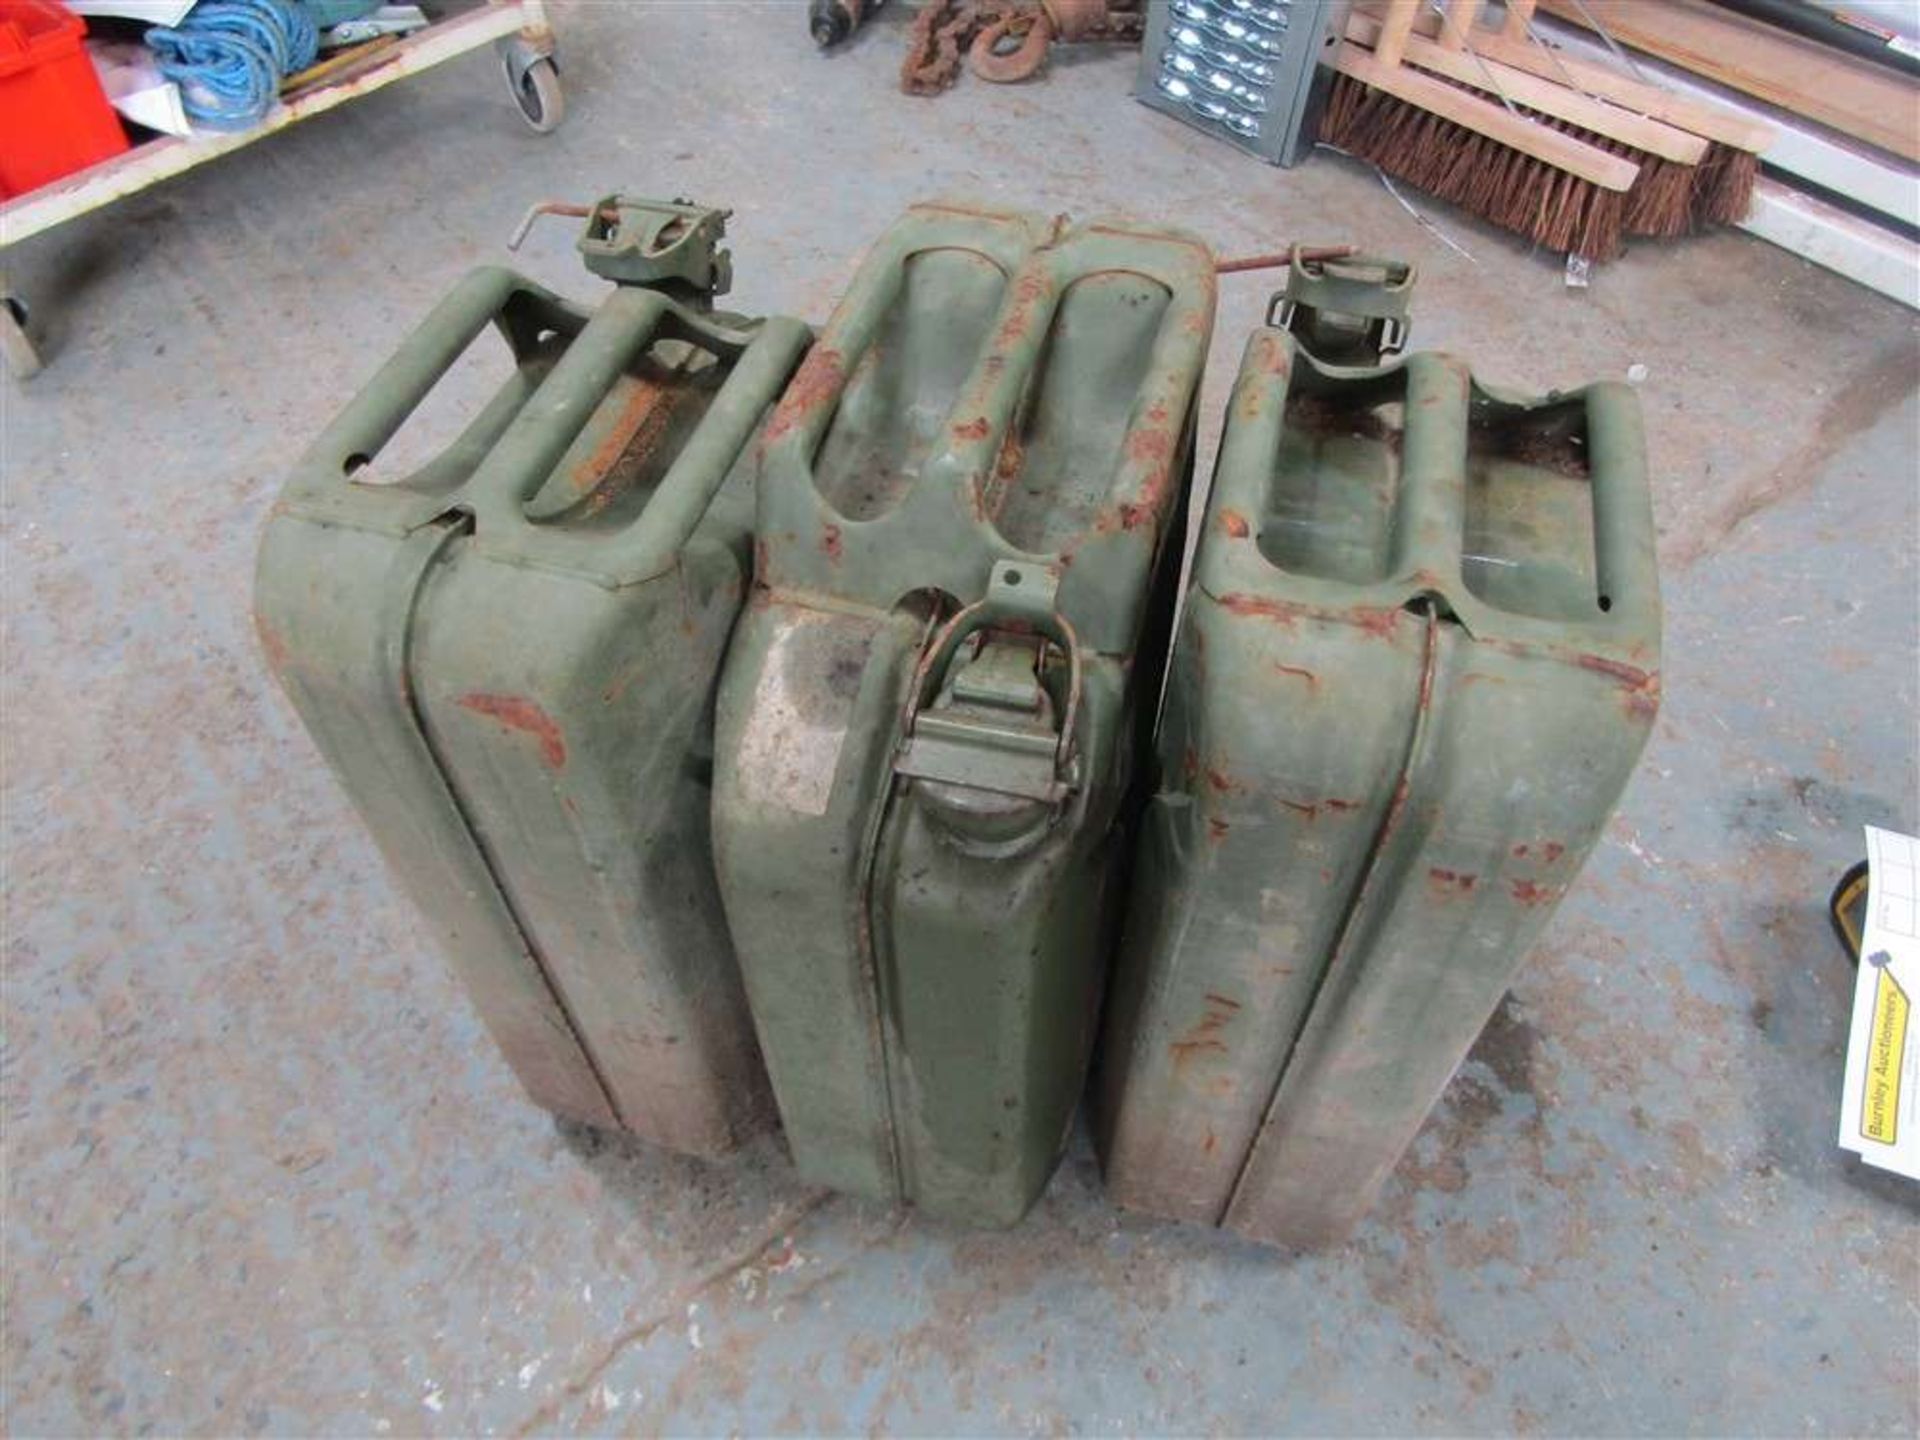 3 x Fuel Cans